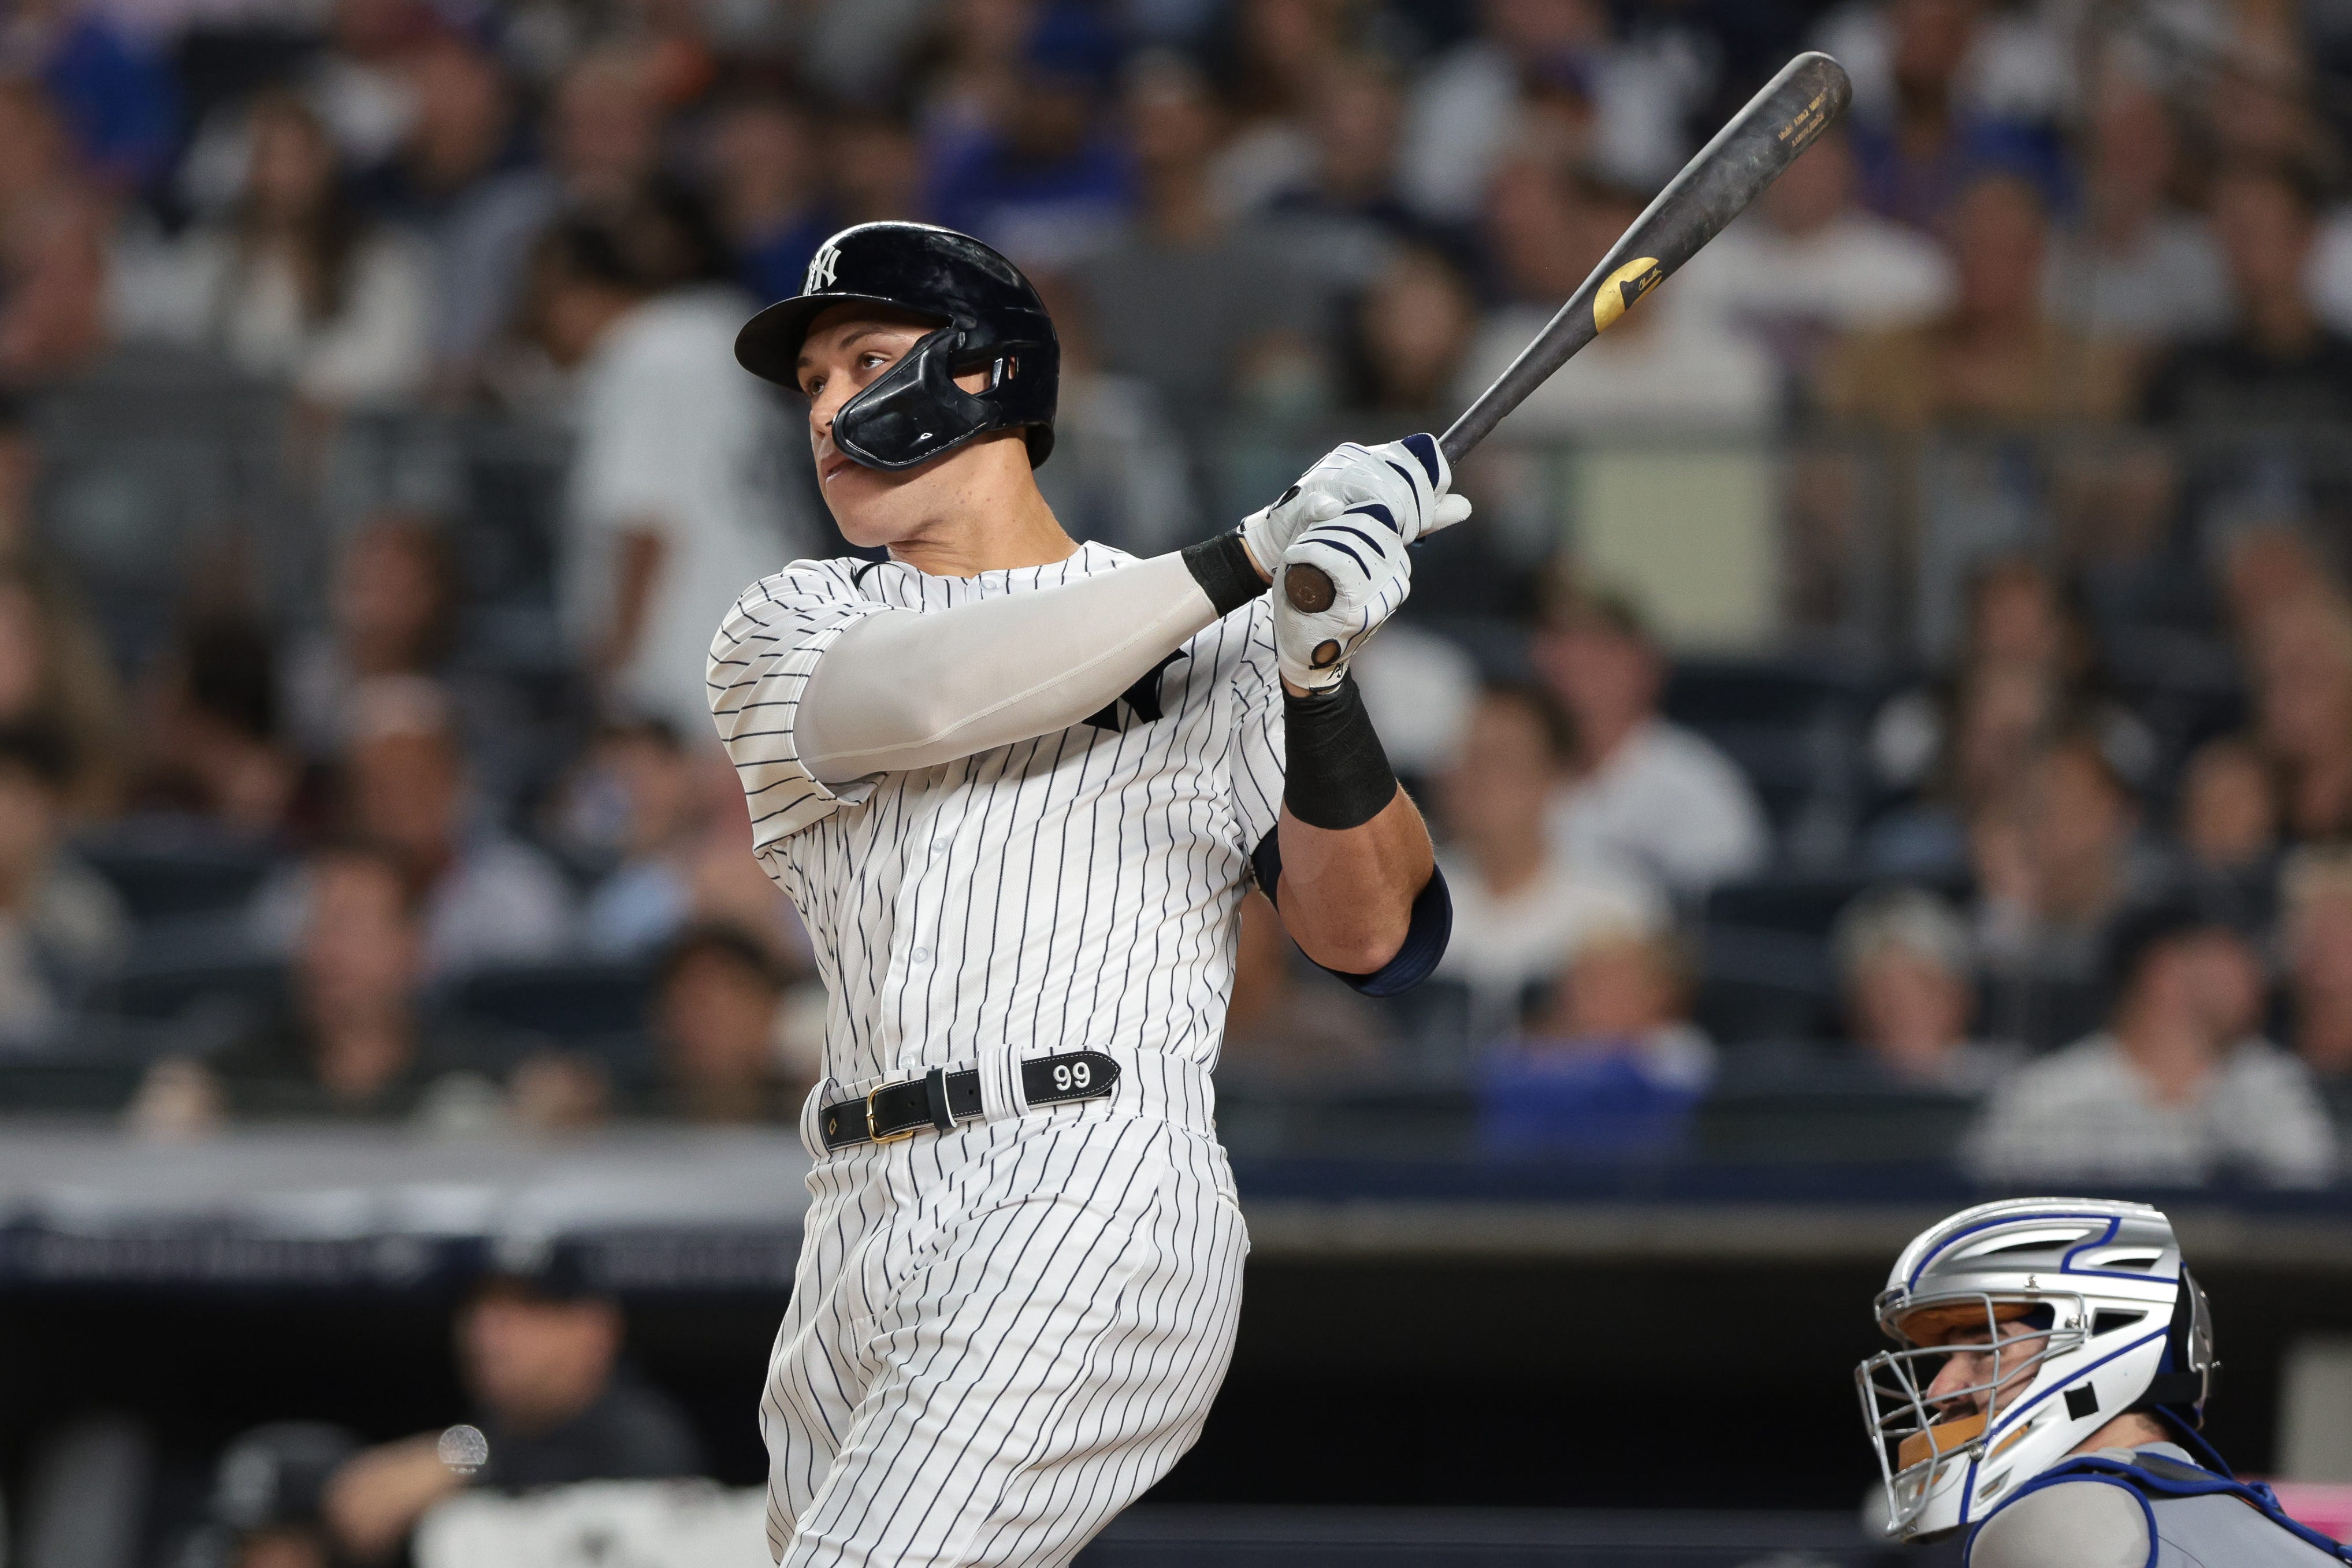 Aaron Judge is making a run at Roger Maris' American League and New York Yankees franchise record of 61 home runs in a season.